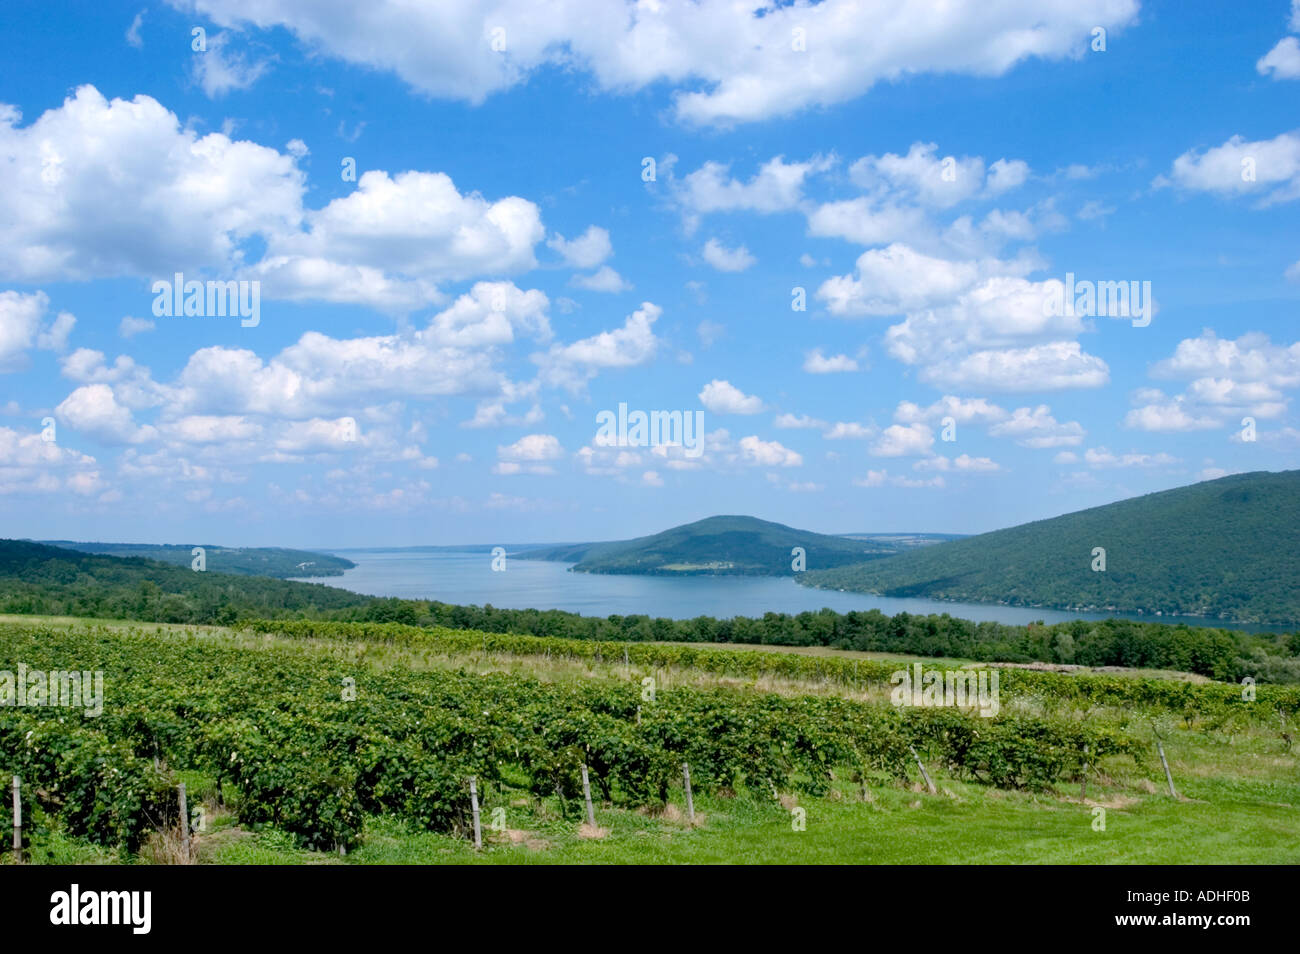 Grape vineyards on hills above Canandaigua Lake in the Finger Lakes region of New York State USA Stock Photo